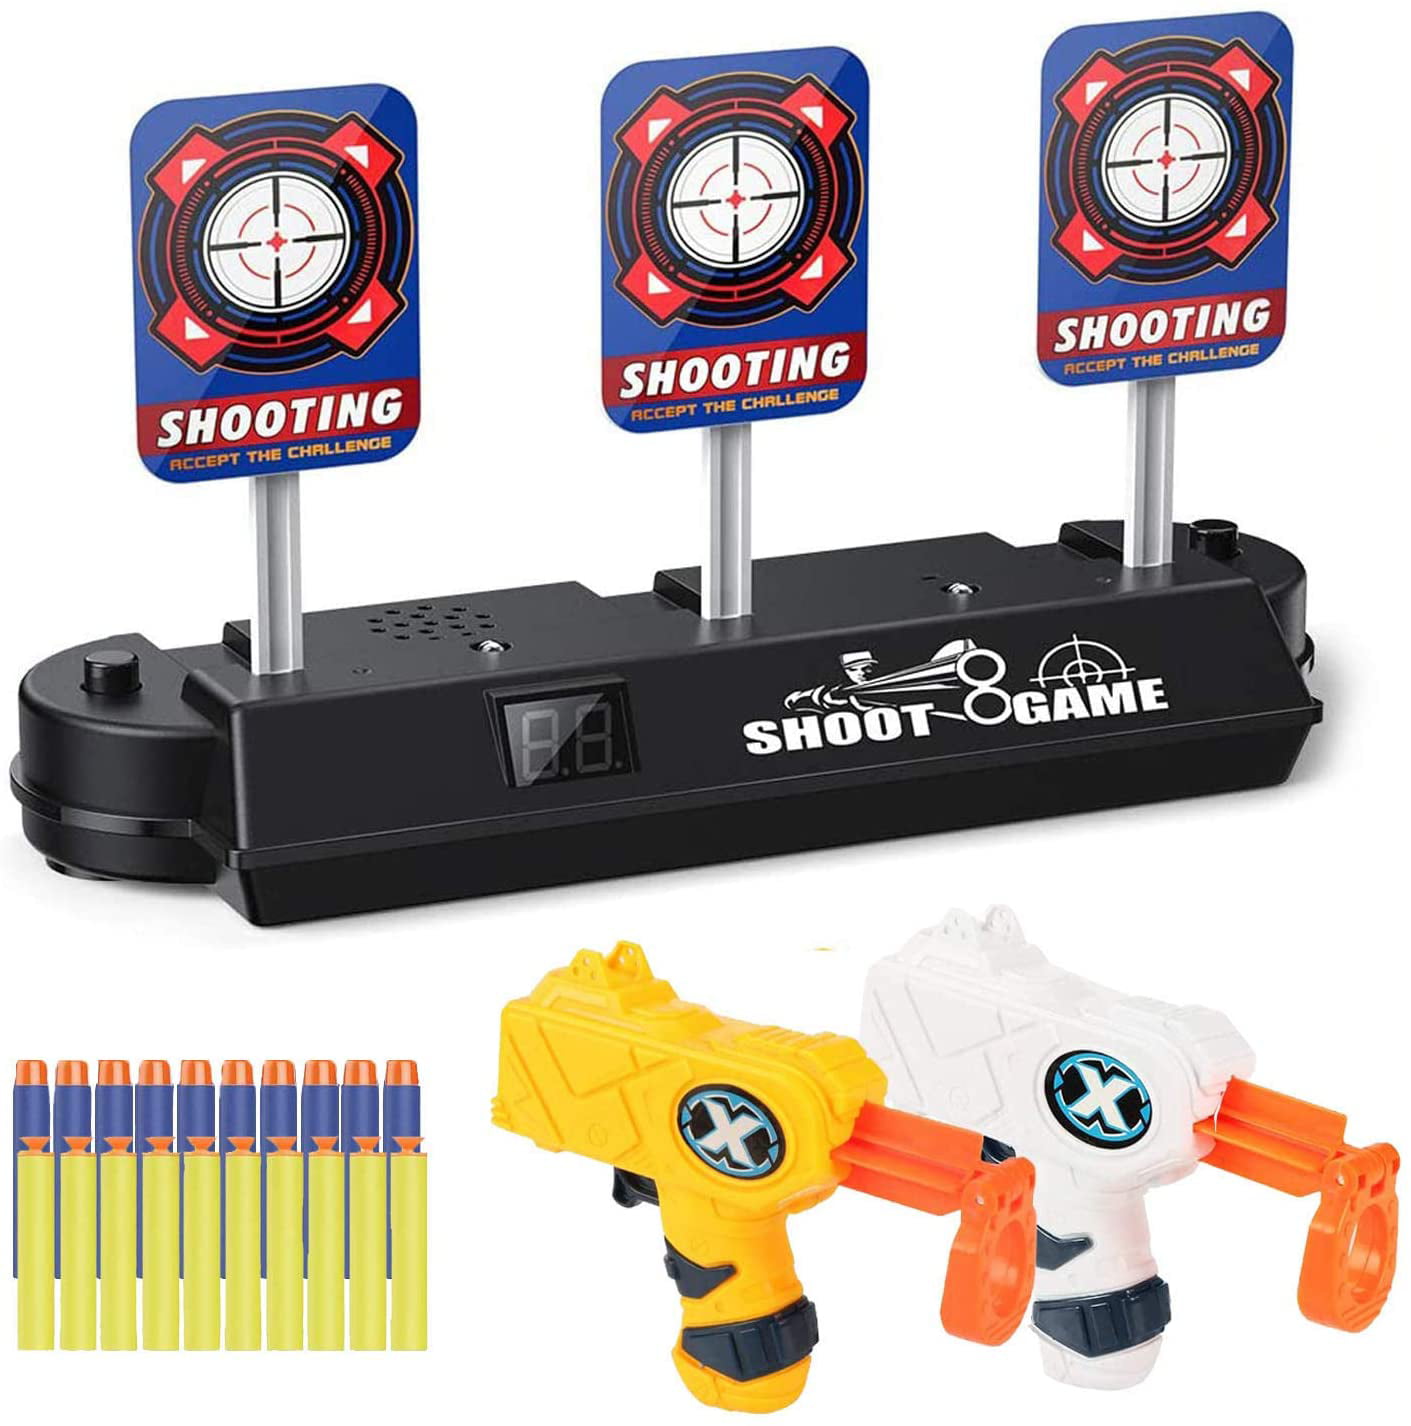 Electric Scoring Auto Reset Shooting Digital Target For Gun Funny Toy For Kids 